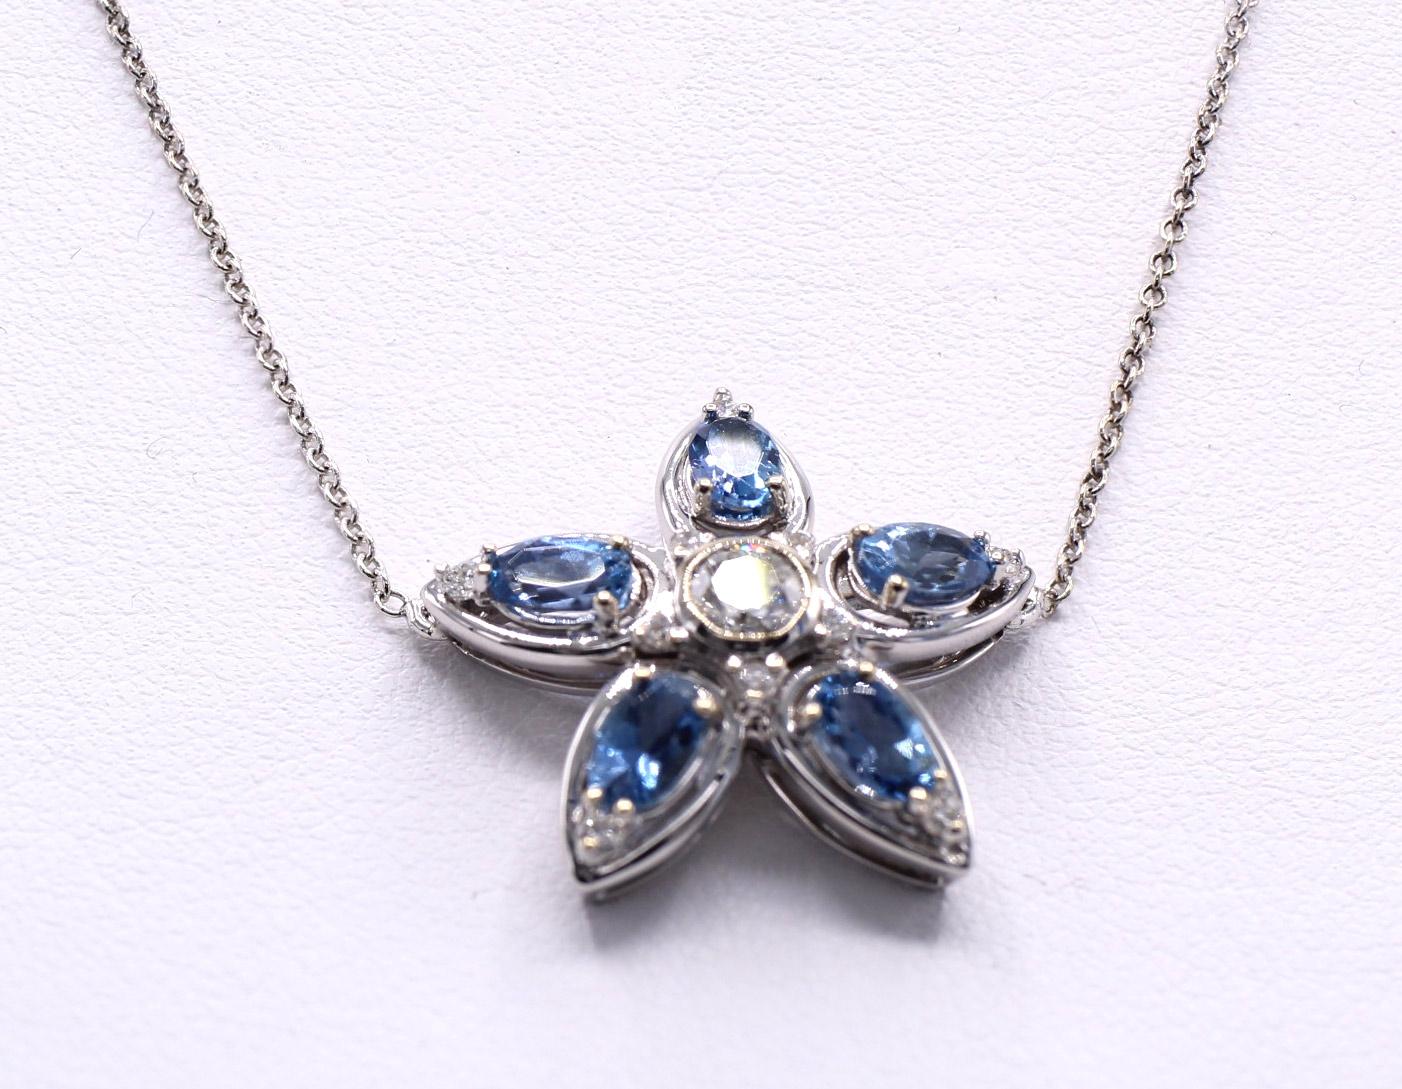 Beautifully designed and masterfully handcrafted this lovely pendant necklace in the shape of a starfish is set with 5 deep saturated lively oval aquamarines with a bright white and sparkly round brilliant cut diamond in its center and small round